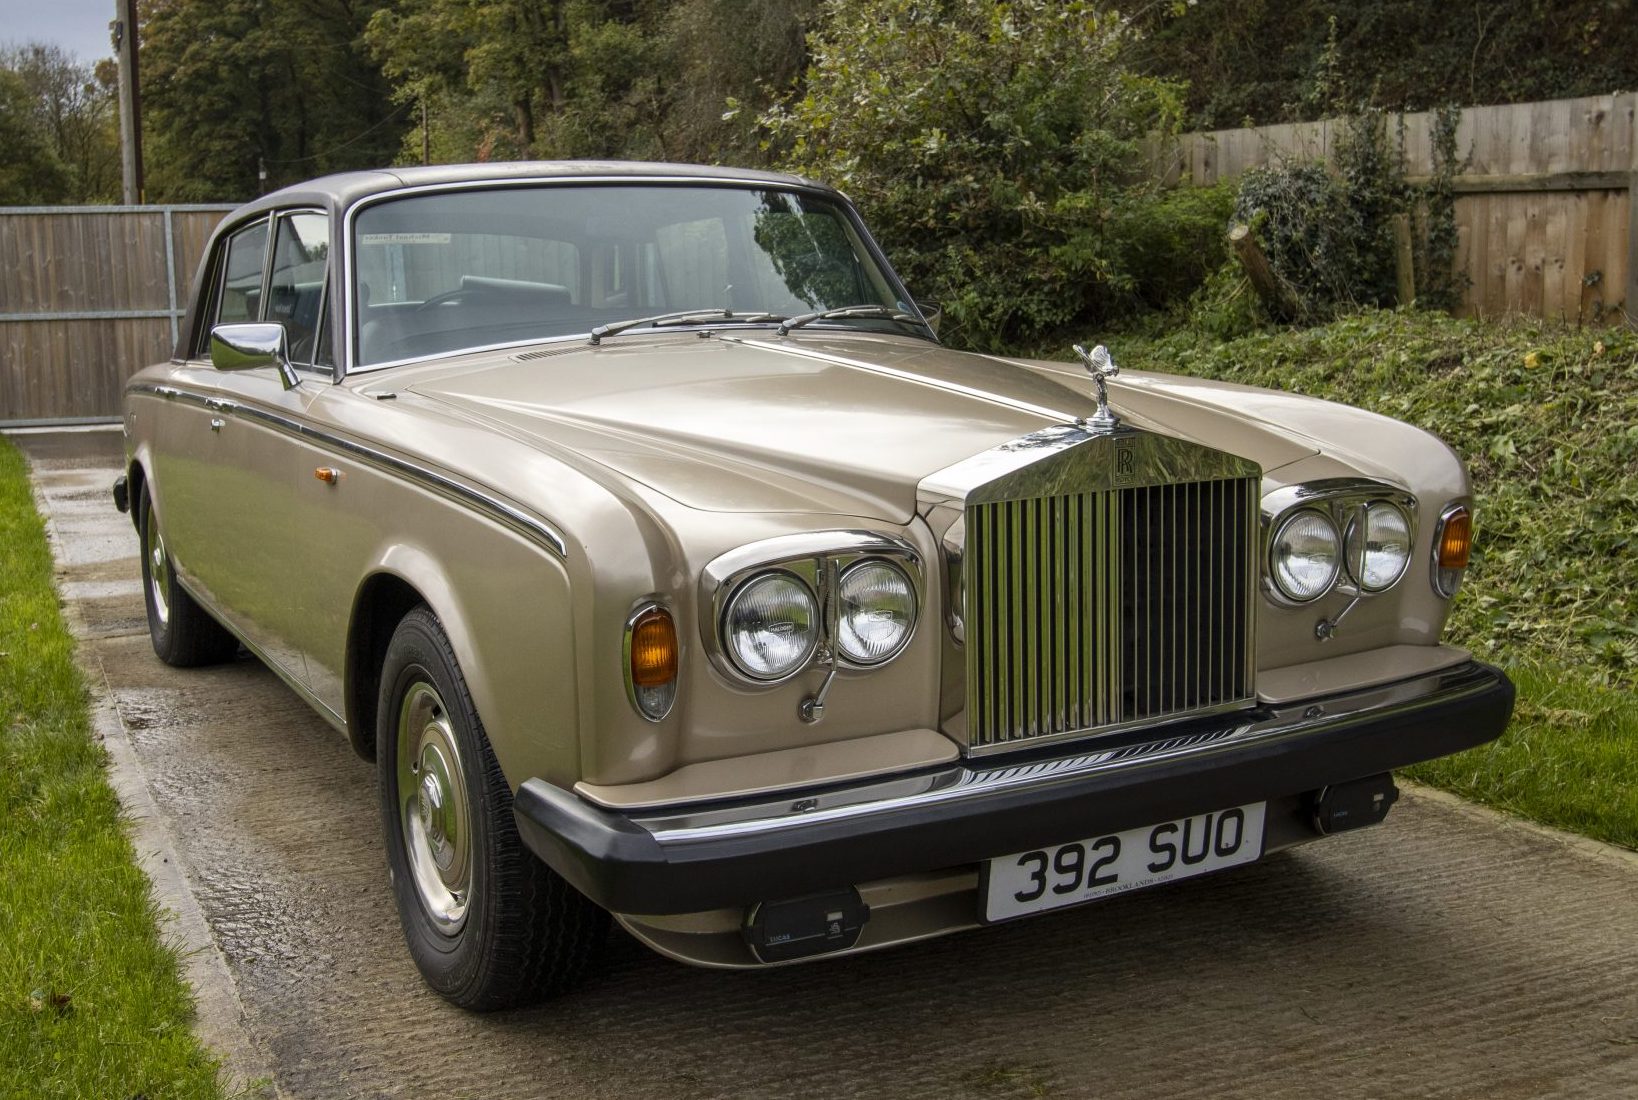 ROLLSROYCE REFLECTS ON ITS PINNACLE PRODUCT TO MARK 118TH ANNIVERSARY